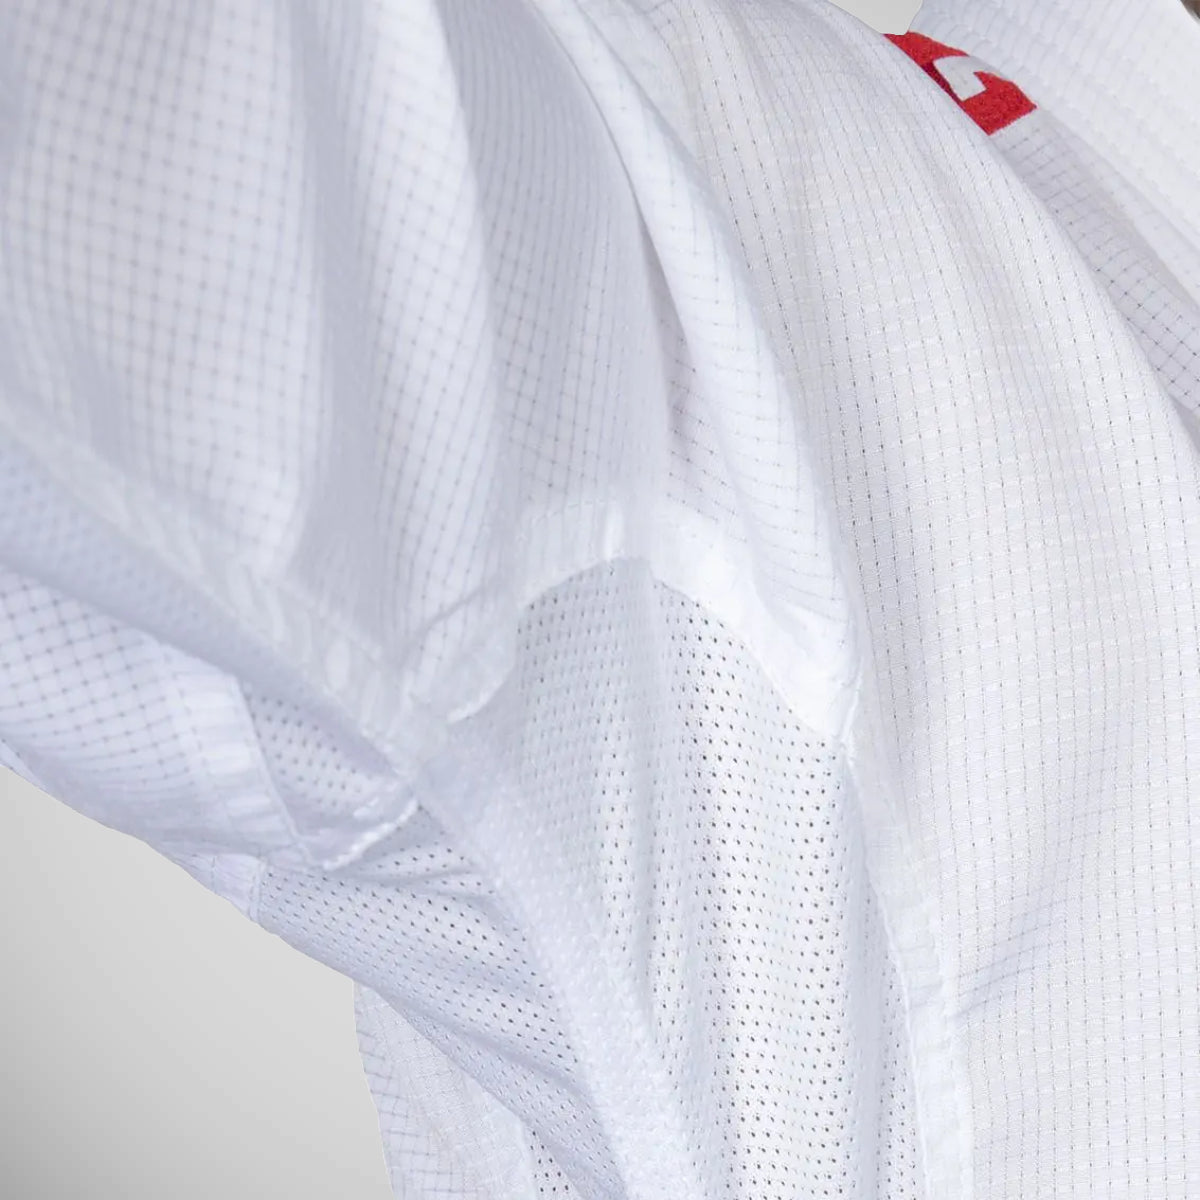 Hayashi Air Deluxe Competition WKF Approved Karate Gi White